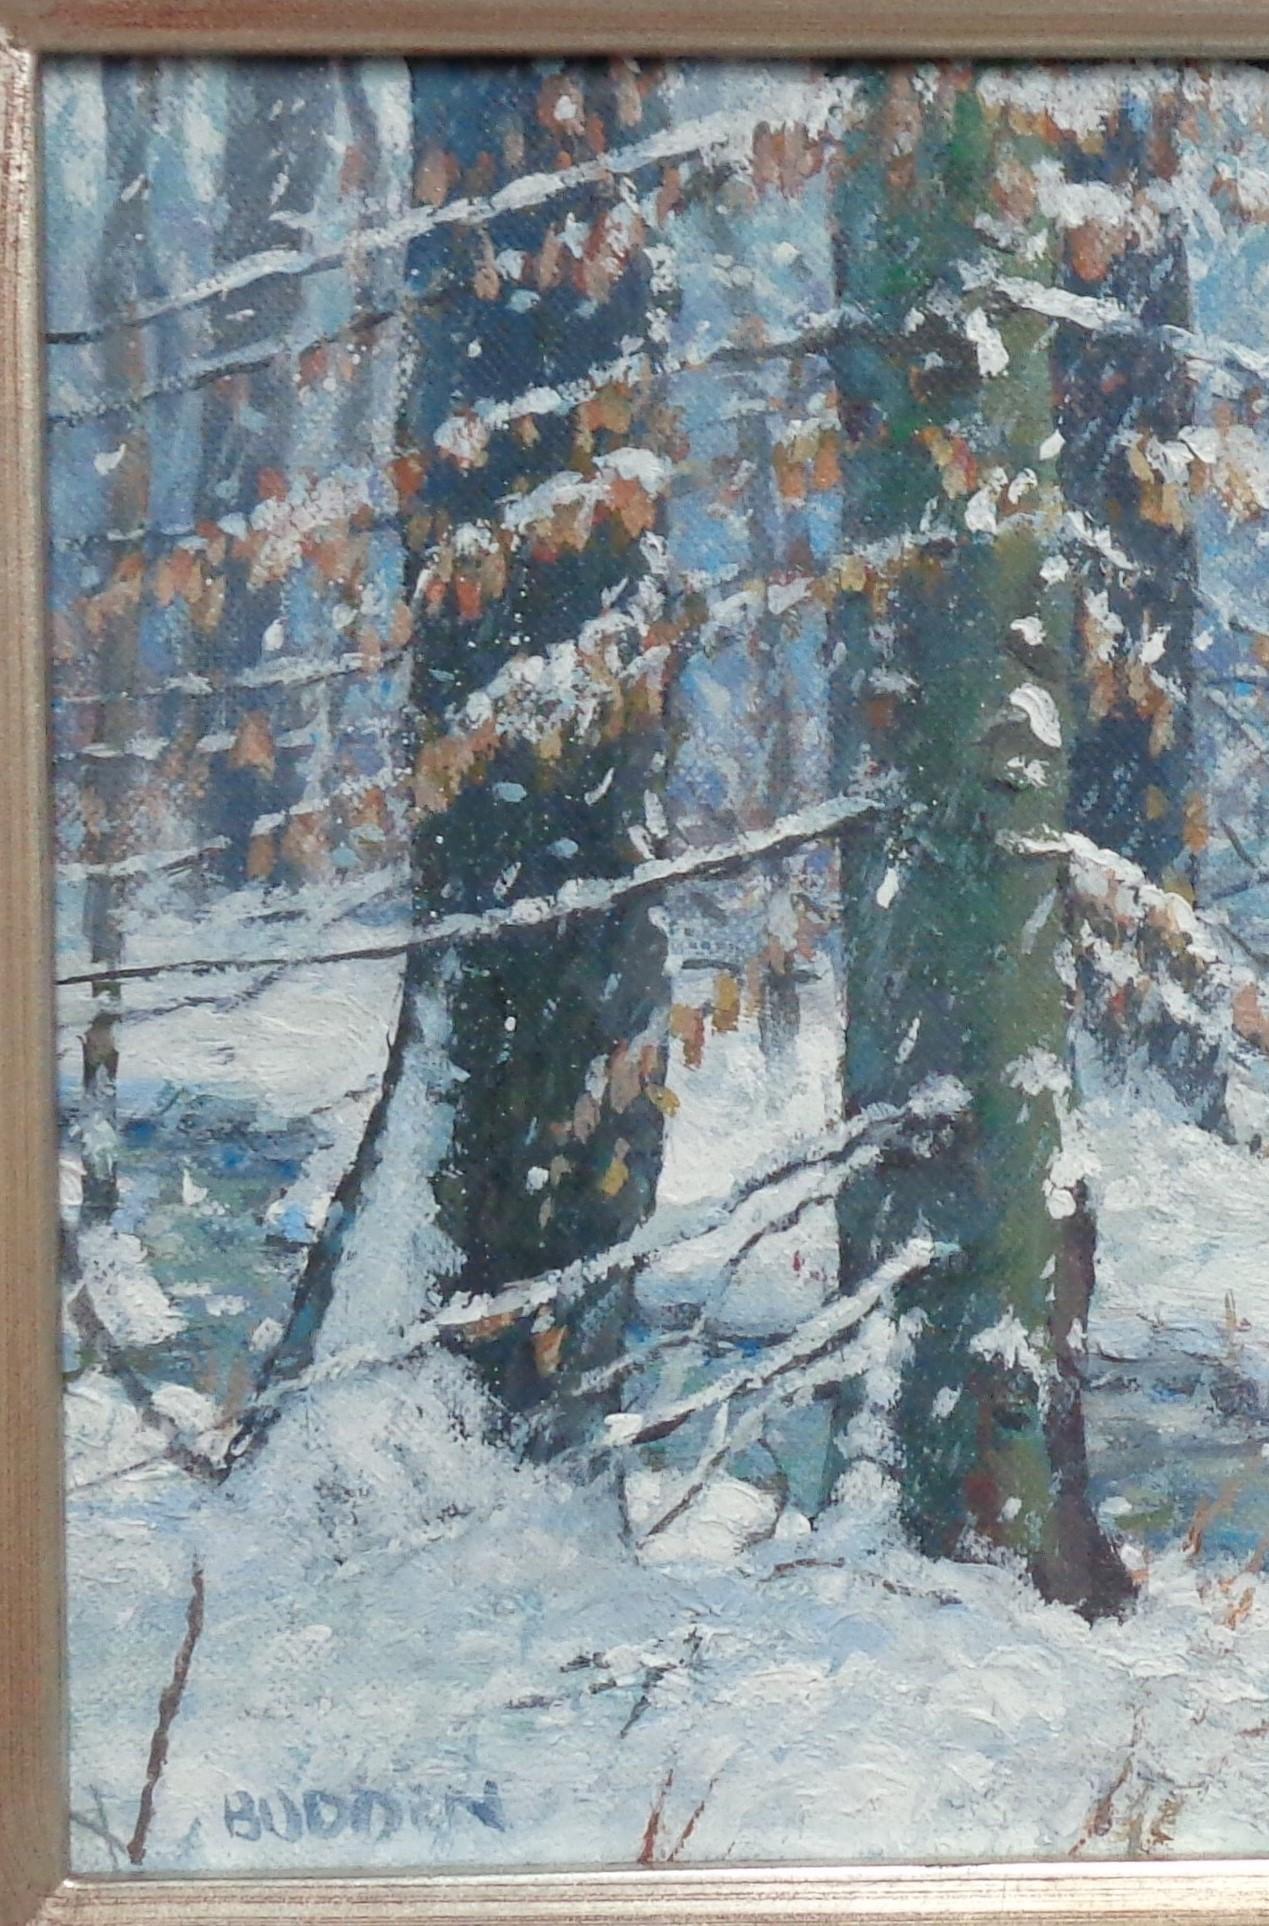  Contemporary Landscape Winter Snow Scene Oil Painting by Michael Budden For Sale 2